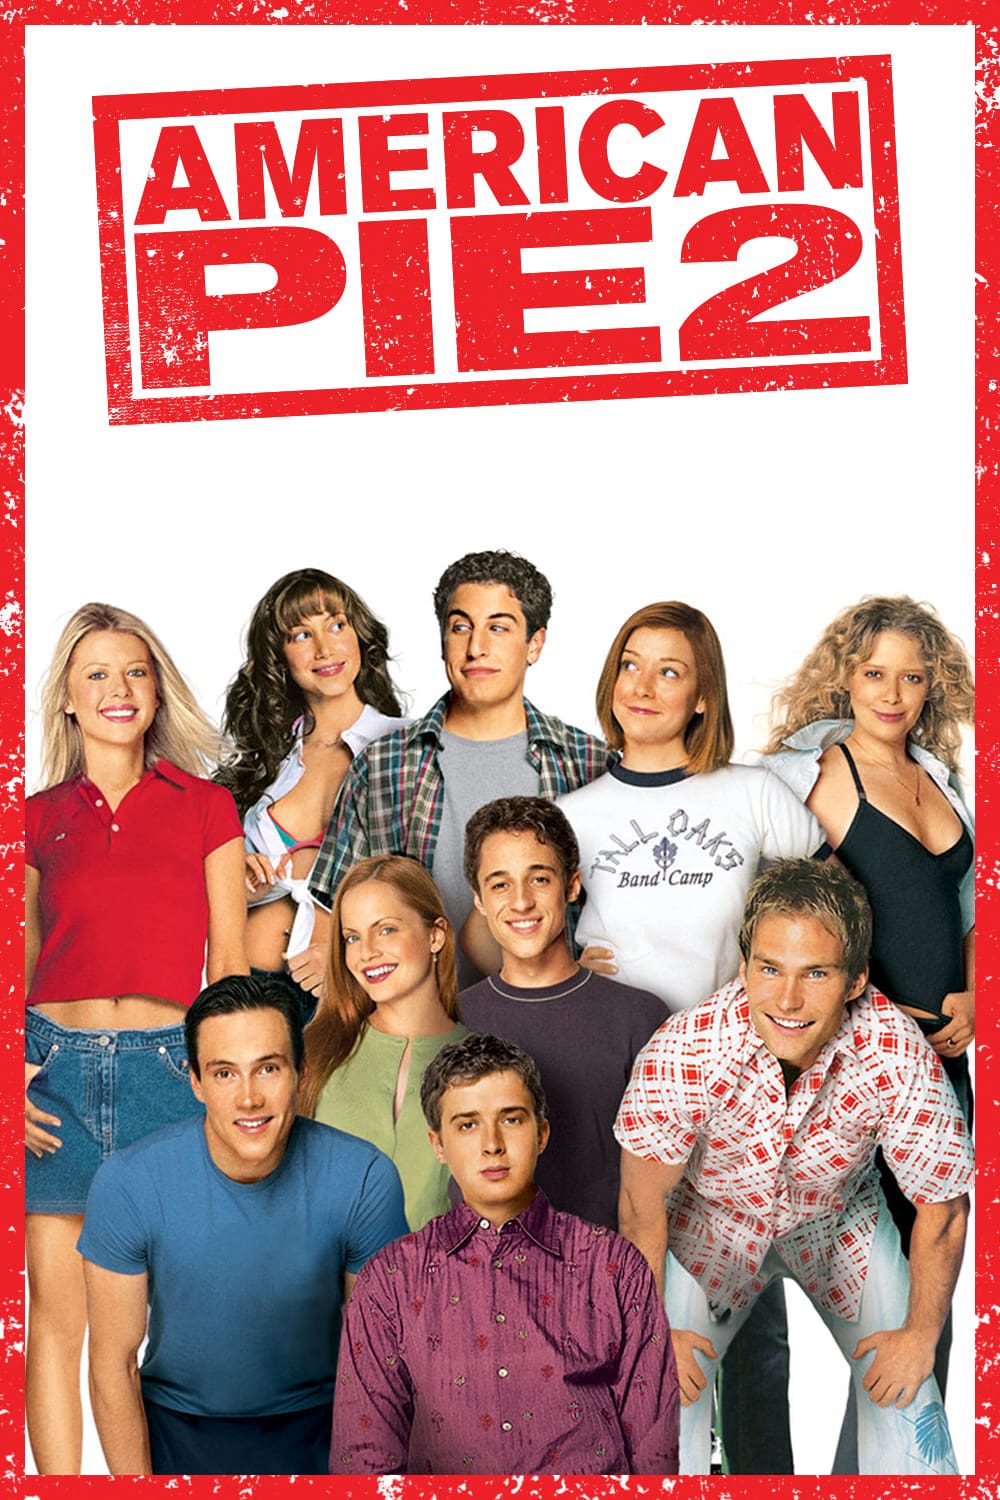 bree newton recommends american pie2 watch online pic